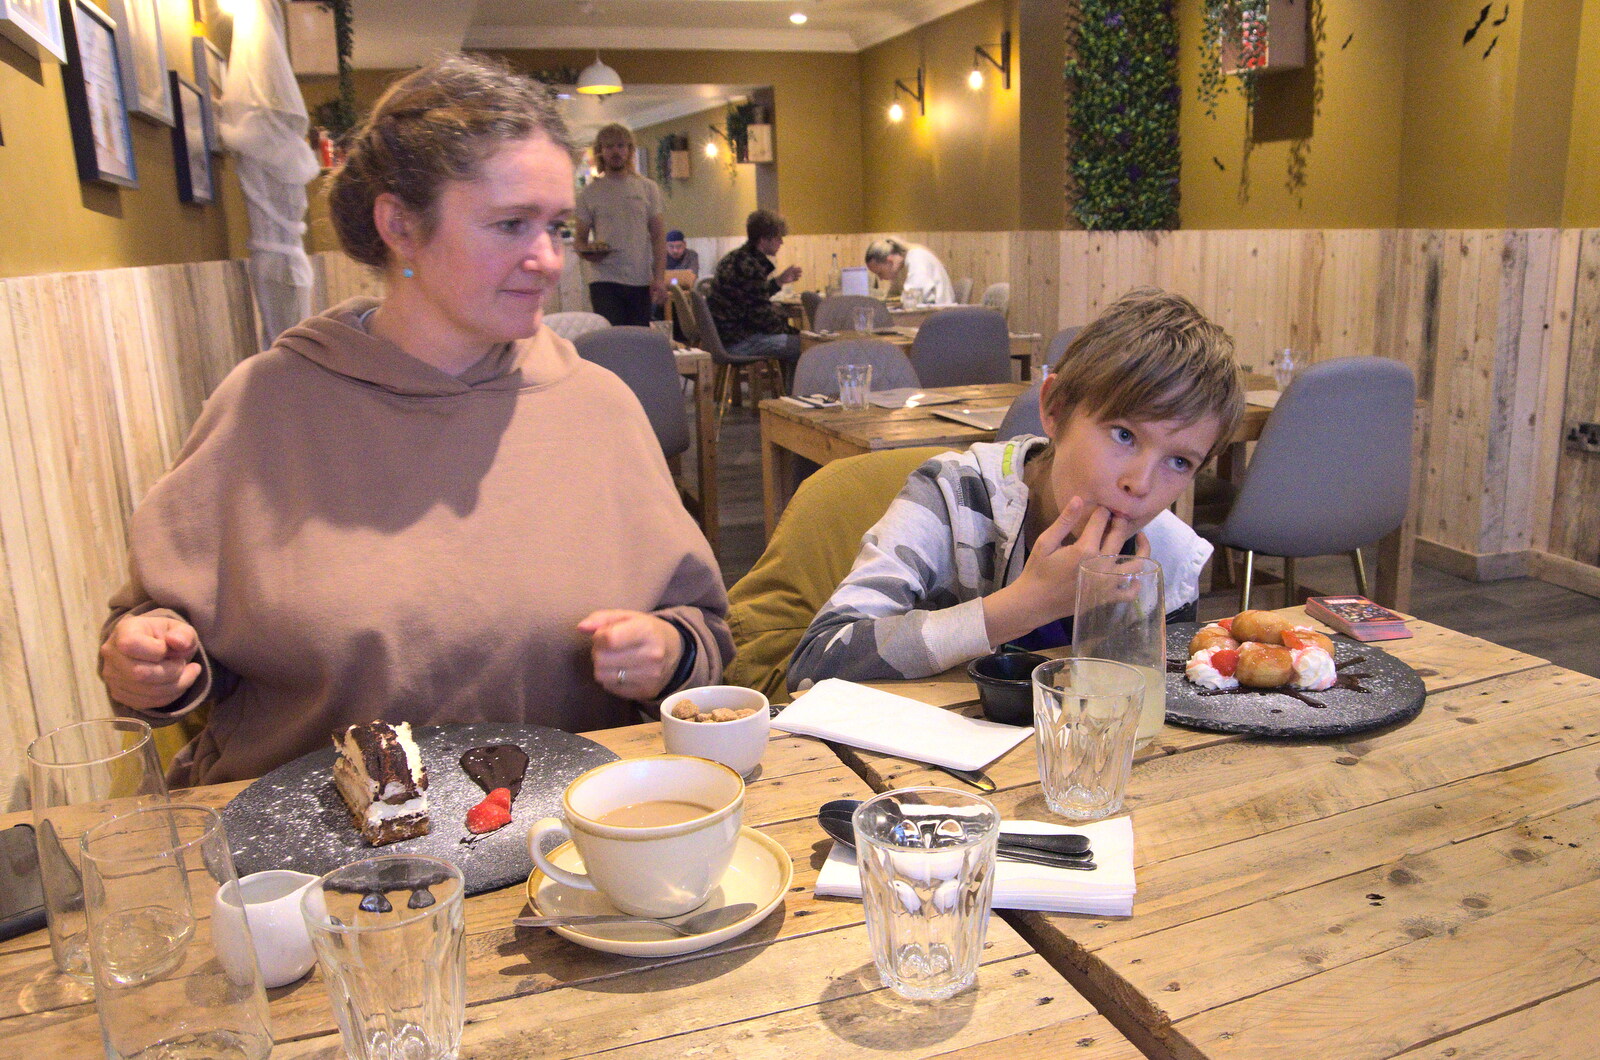 Pizza and Pasta in Bury St. Edmunds, Suffolk - 30th October 2022: Harry gets some doughnuts with strawberries